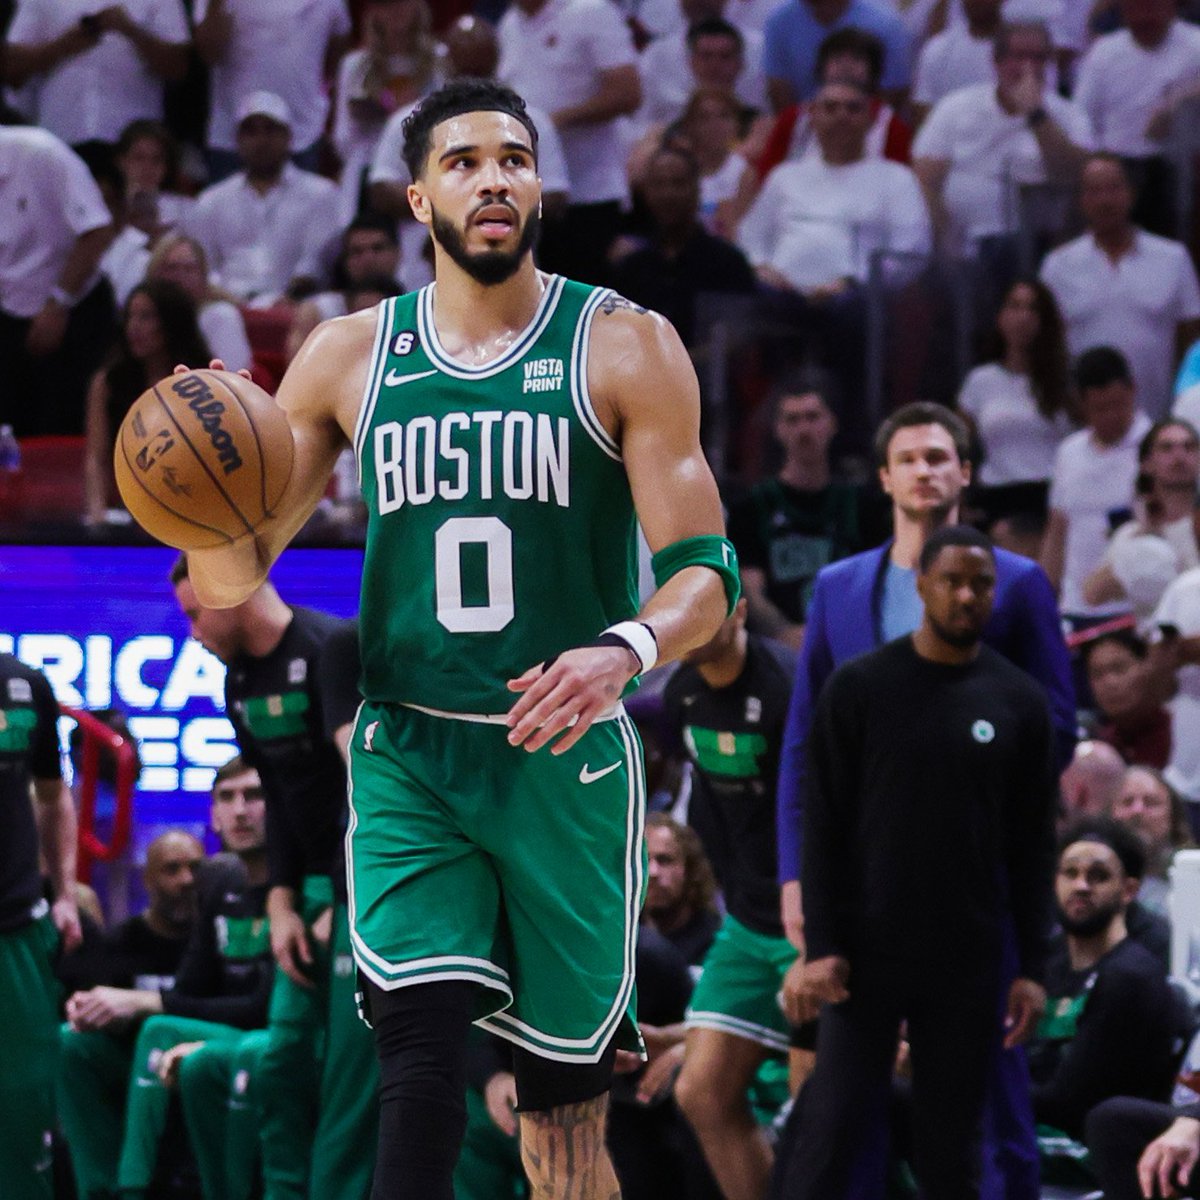 GAME 4 FINAL SCORE BOS: 116 MIA: 99 Celtics win on the road to force Game 5!